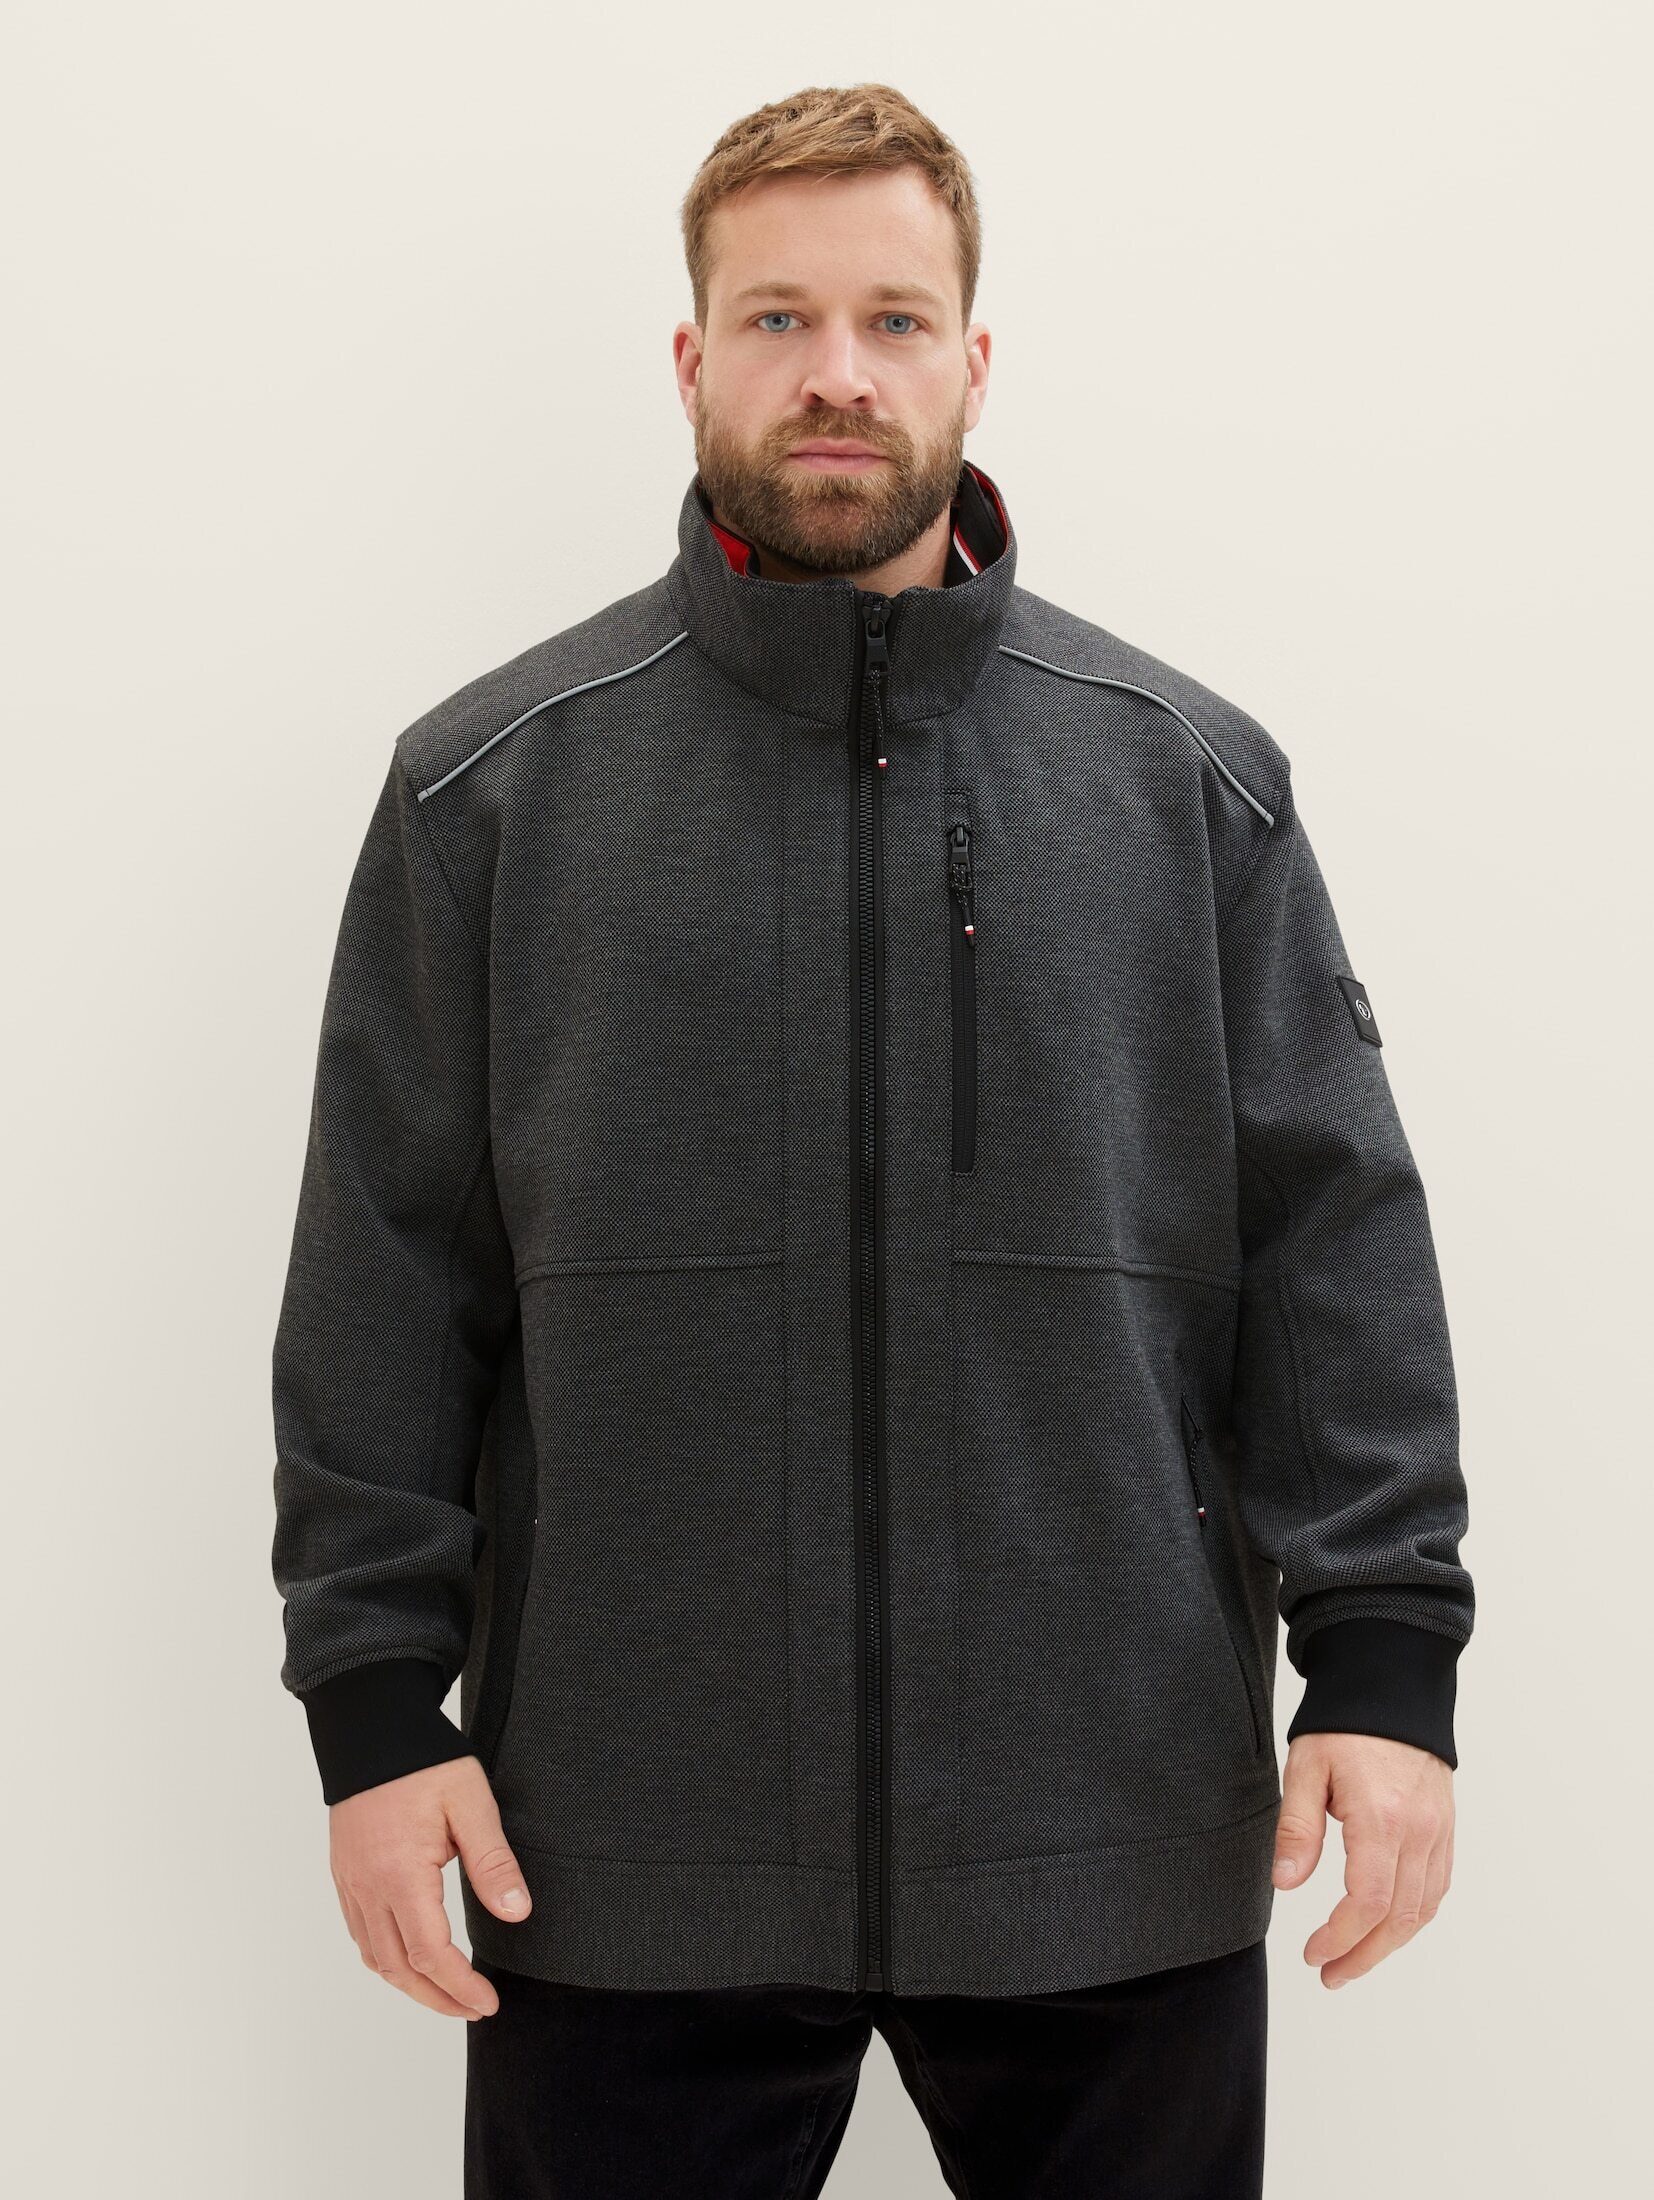 TOM TAILOR PLUS Blouson Plus - Jacke mit verdeckter Kapuze anthracite knitted structure